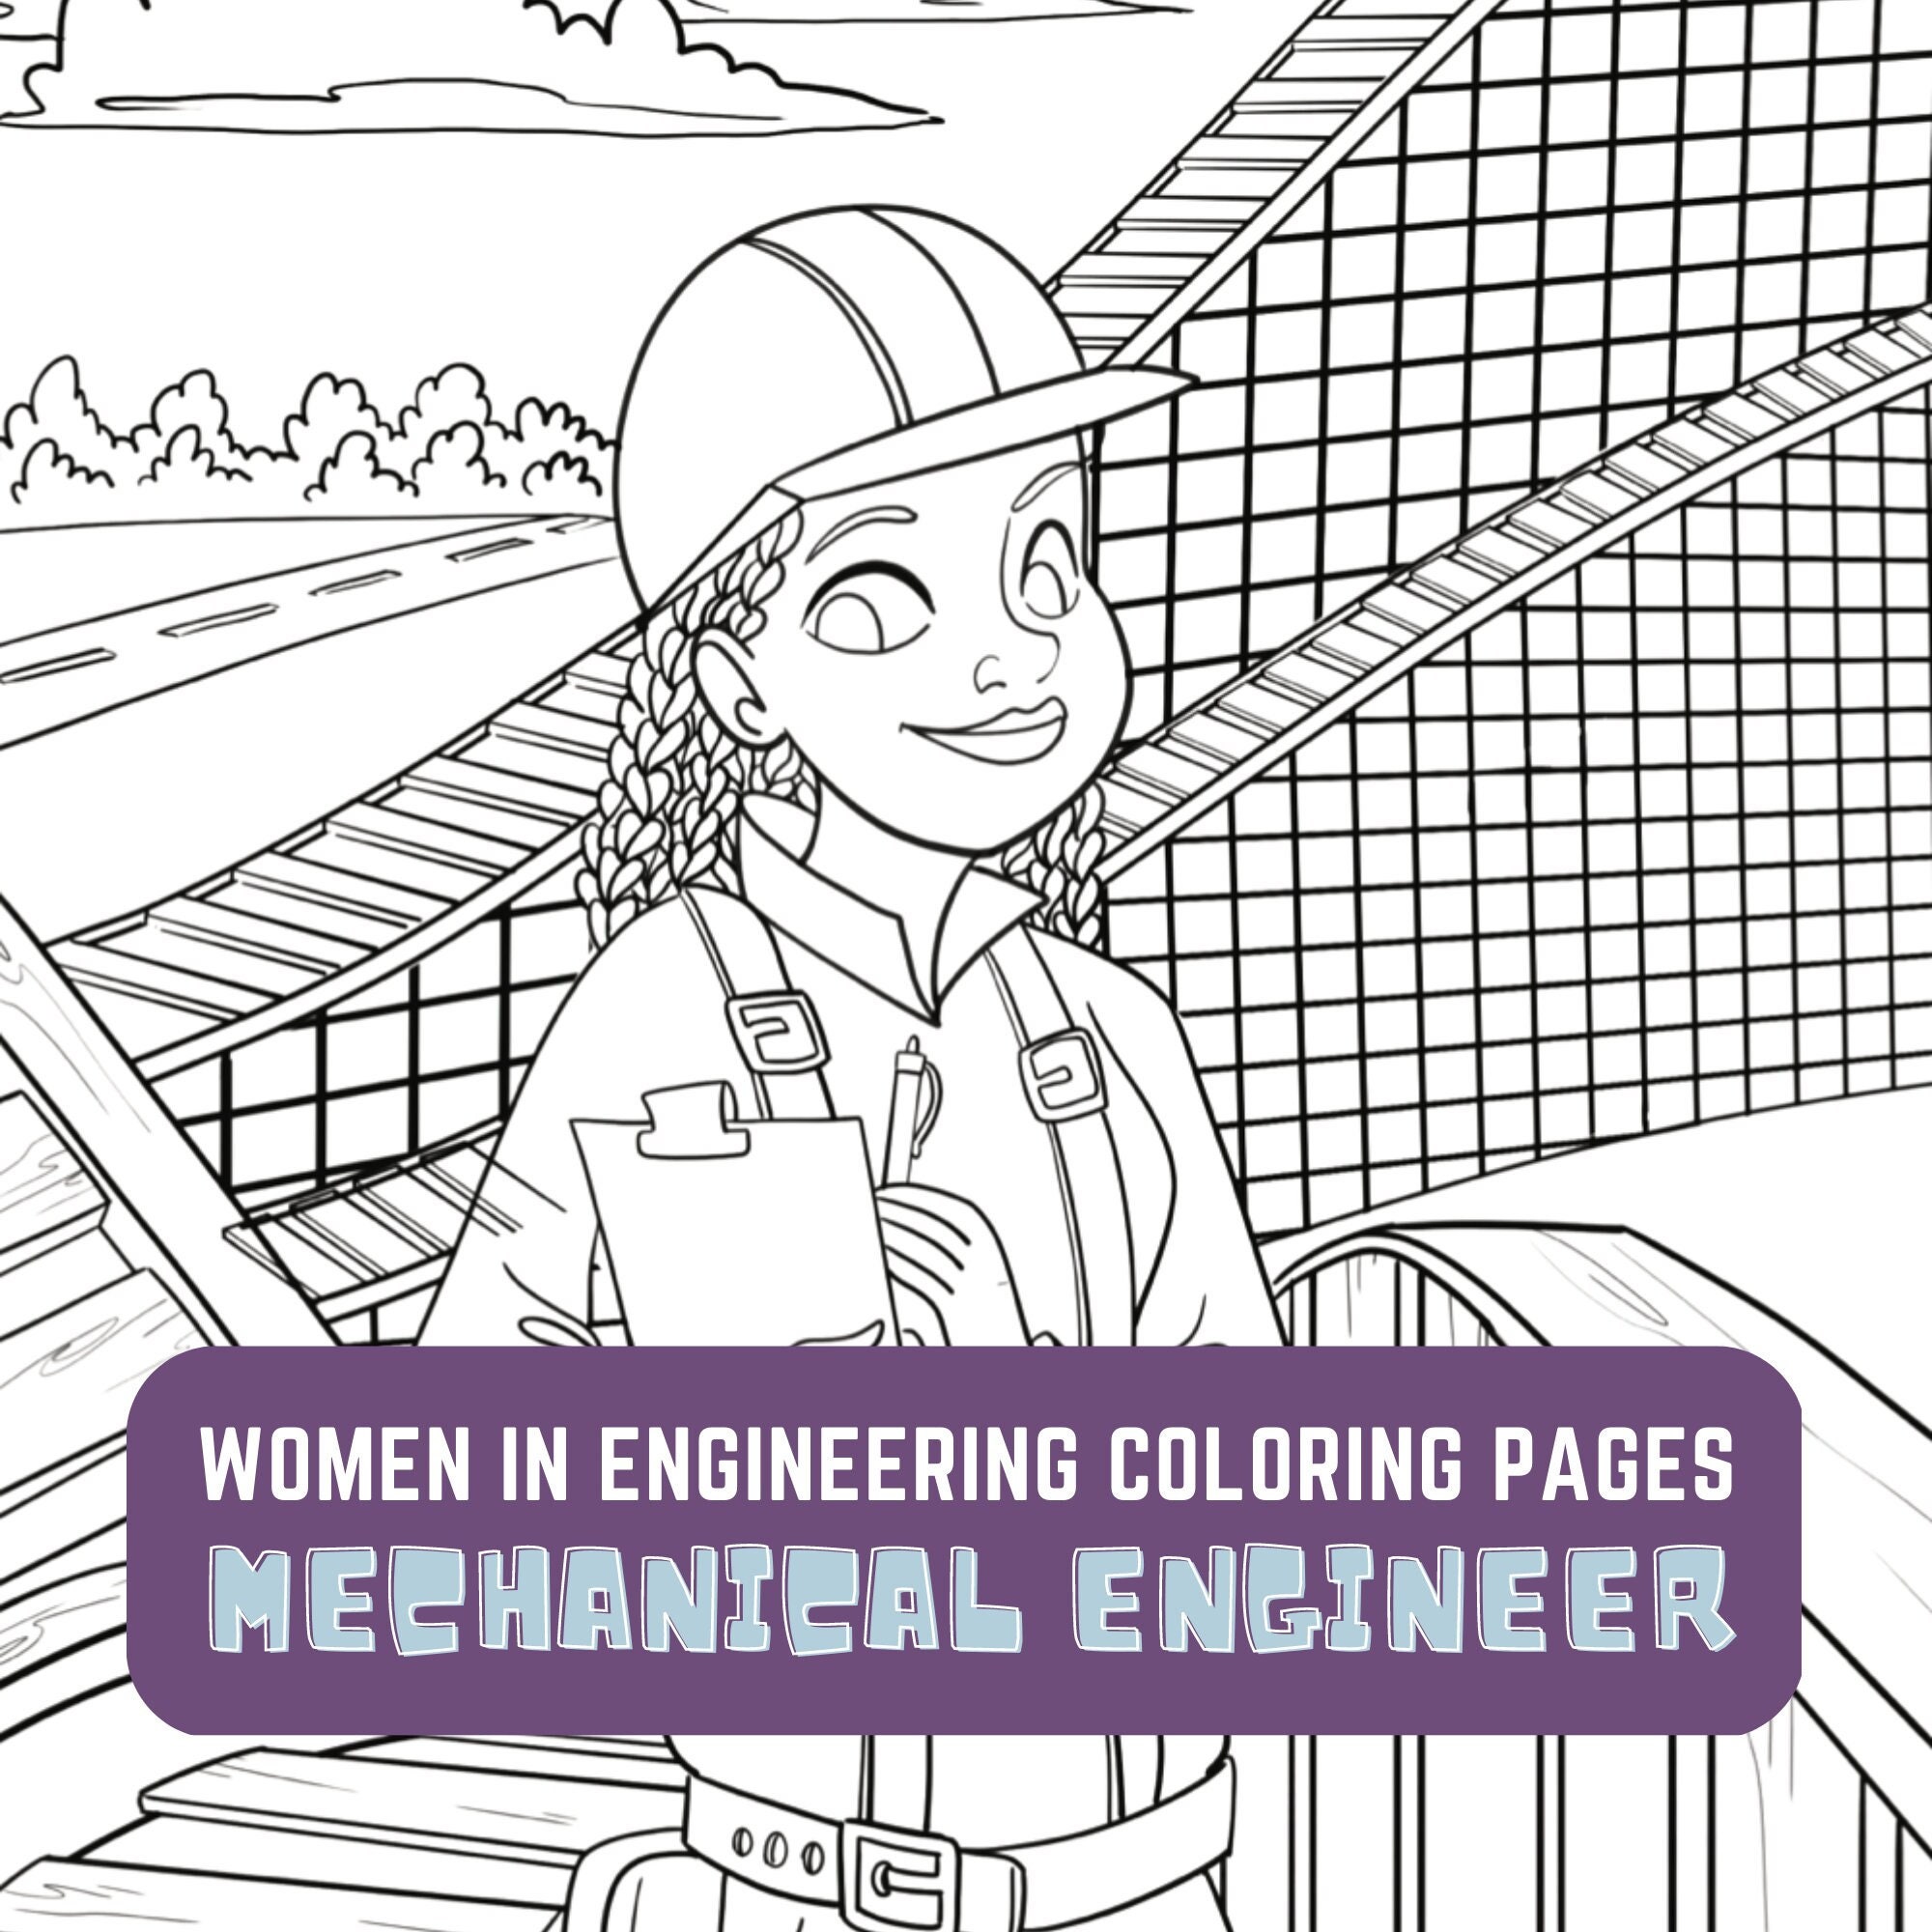 Mechanical engineer kids coloring page women in stem activity stem activity classroom resource career exploration